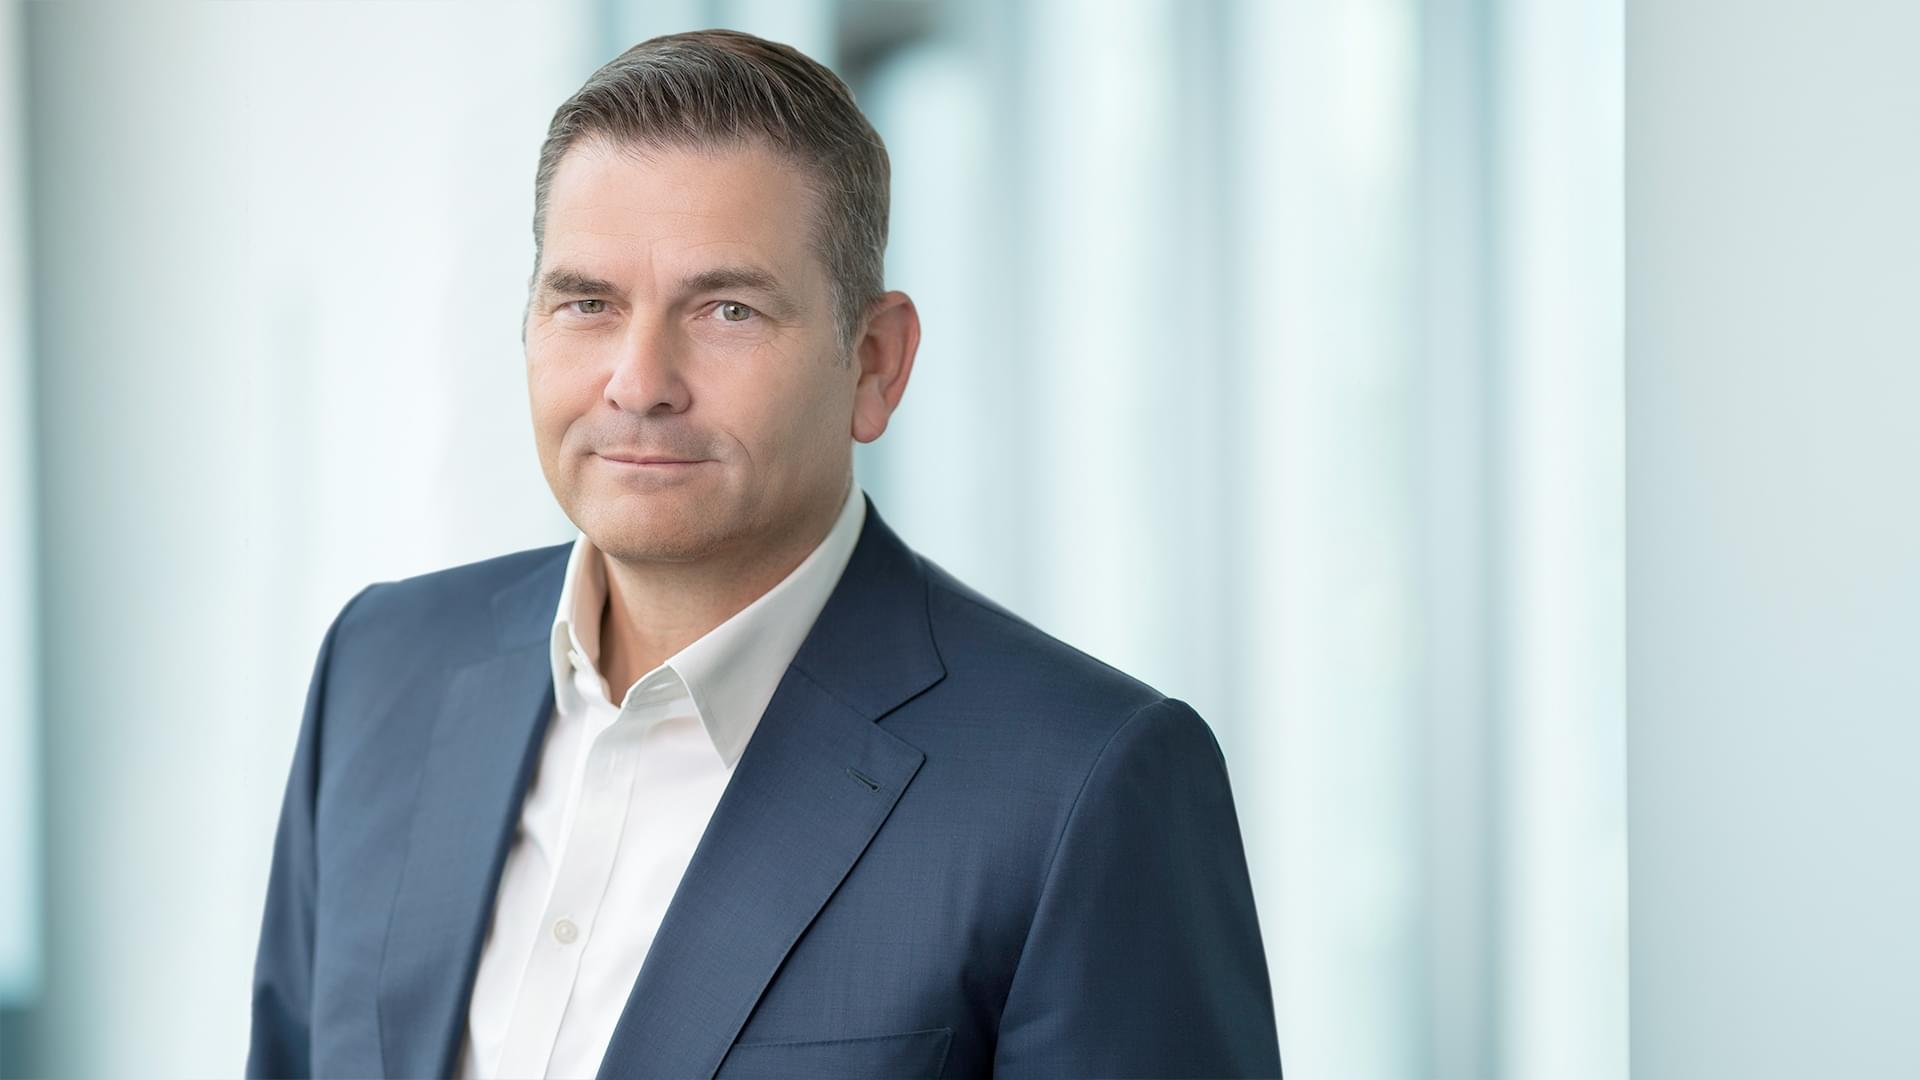 Portrait of Marc Llistosella, Chief Executive Officer of Knorr-Bremse AG